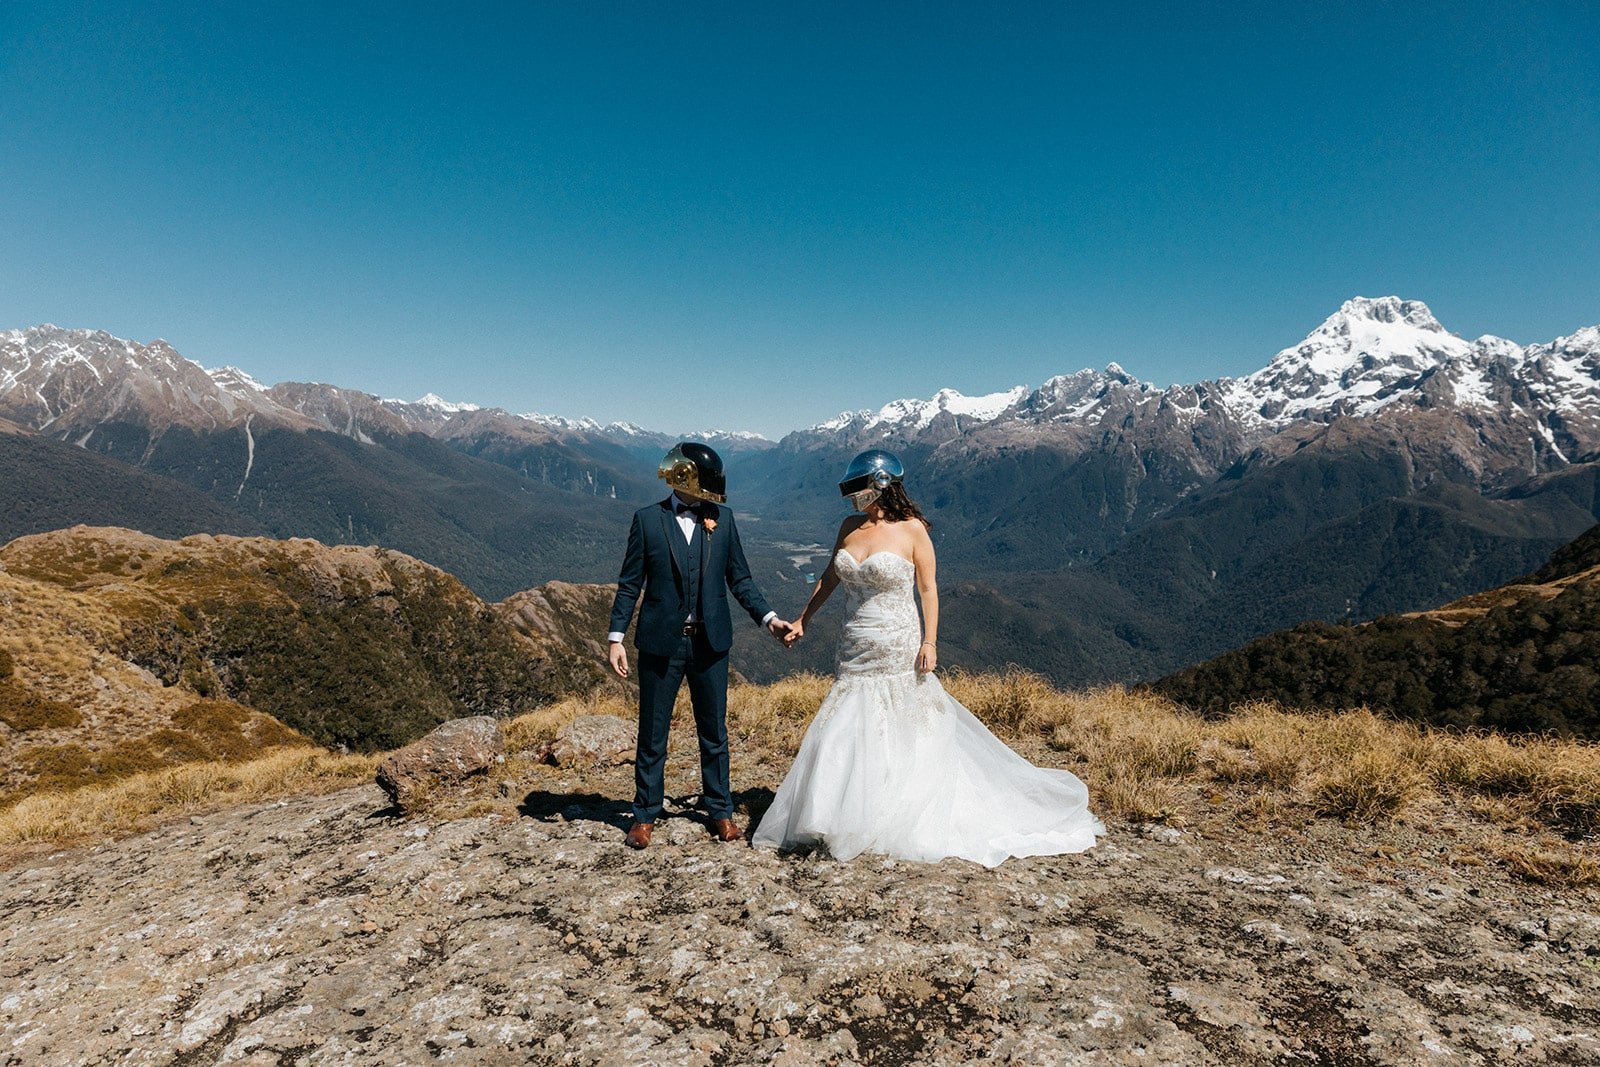 Faq about eloping in New Zealand